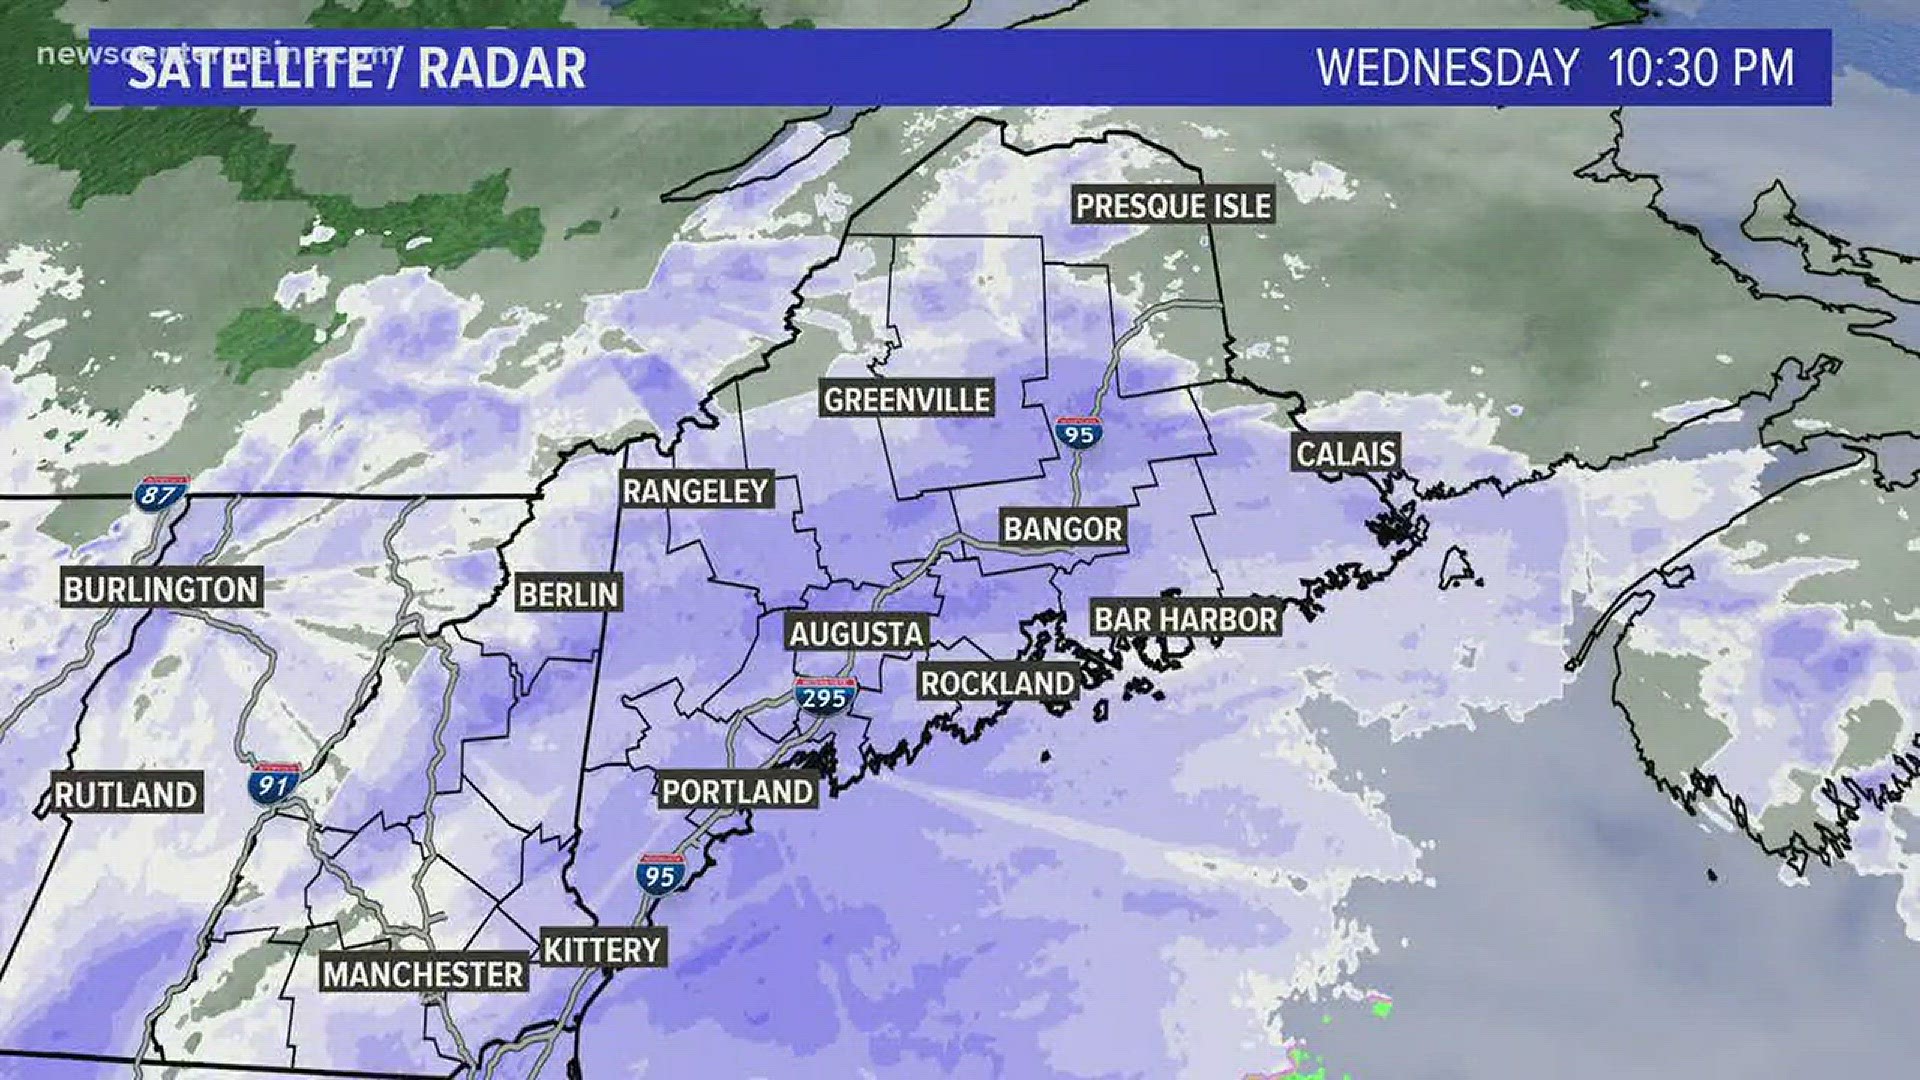 Snowstorm covers most of Maine tonight into tomorrow.